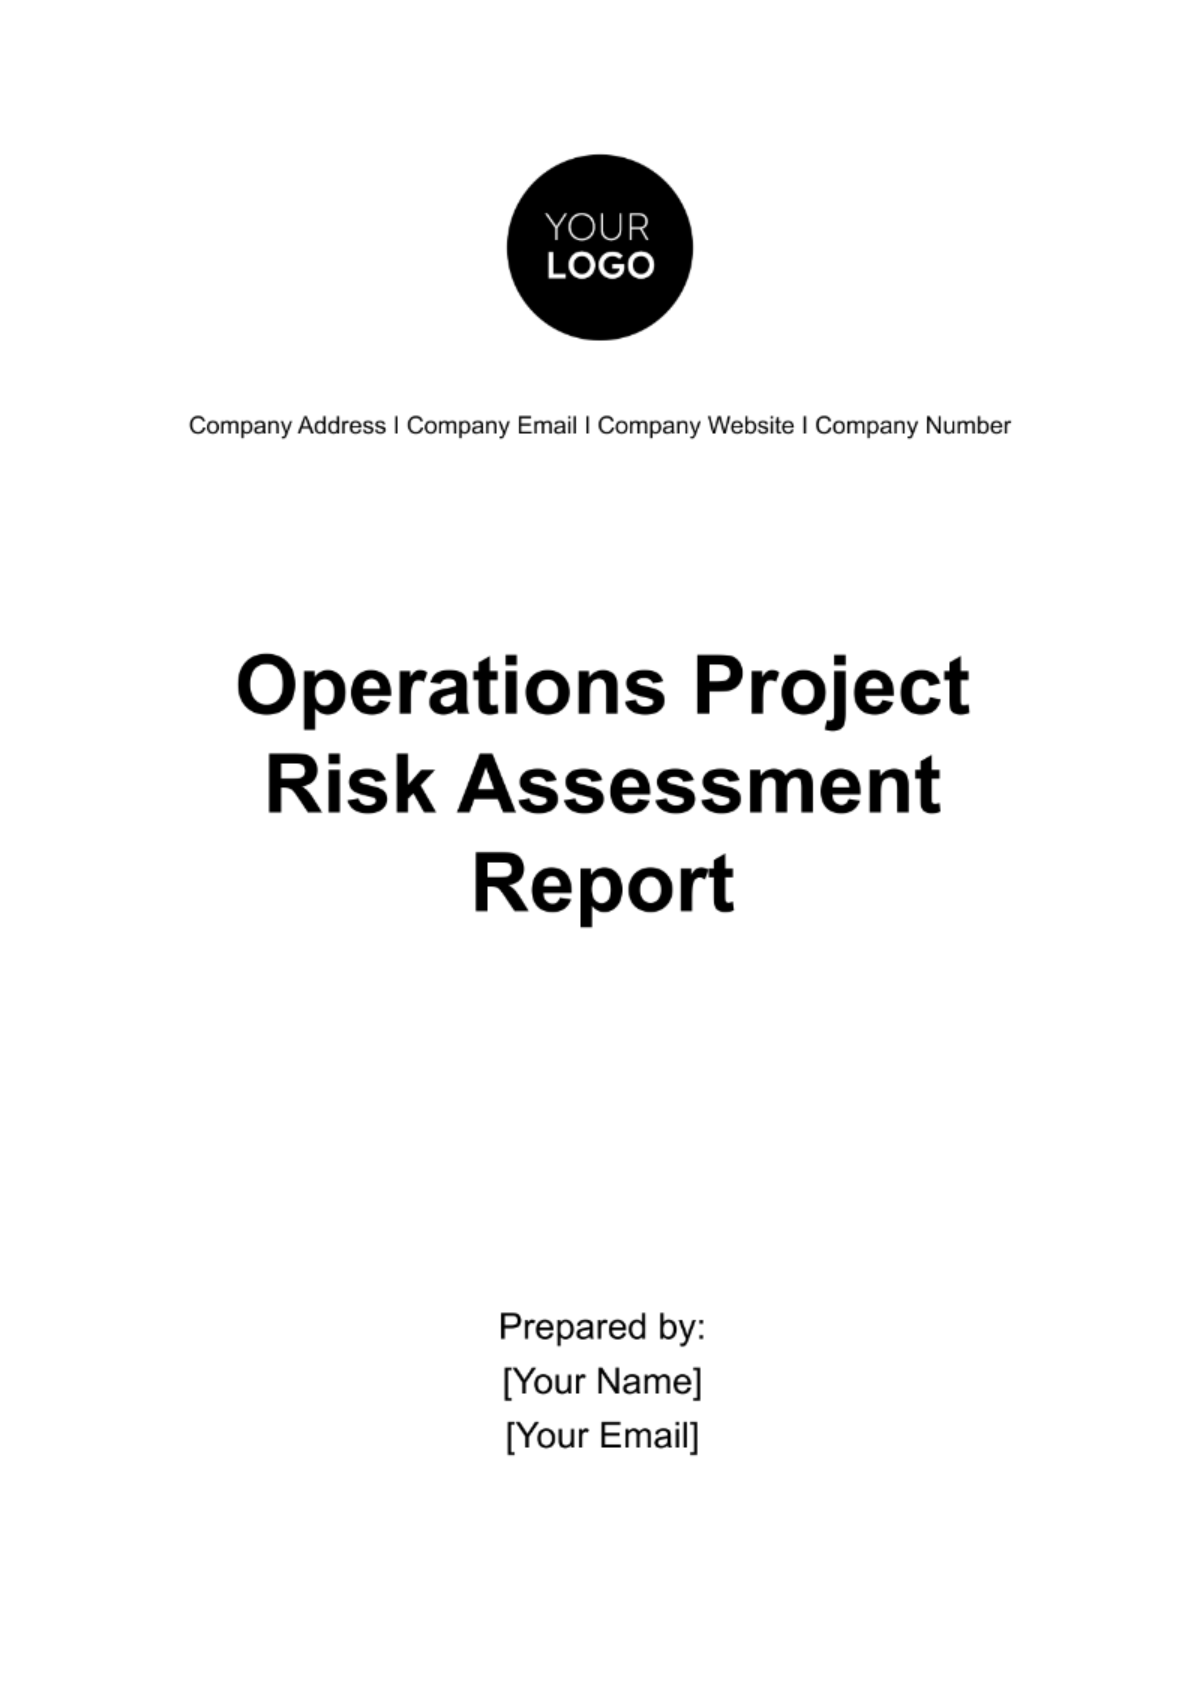 Operations Project Risk Assessment Report Template